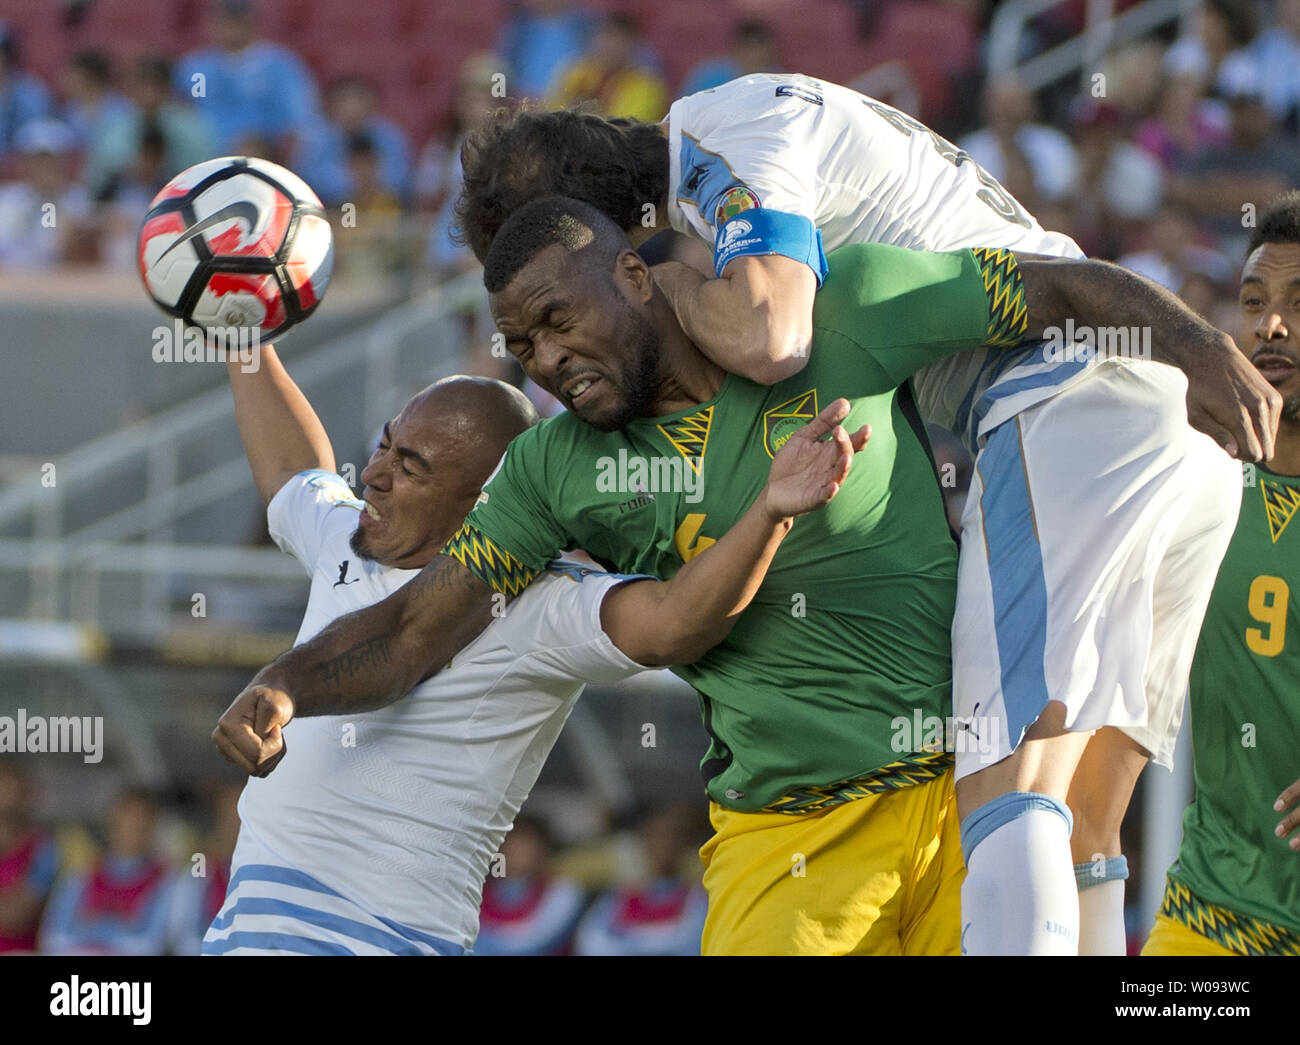 Jamaica's Westley Morgan (C) gets squeezed between Uruguay's Raul Arevlo Rios (L) and Diego Godin on a corner kick in the first half at COPA America Centenario at Levi's Stadium in Santa Clara, California on June 13,  2016.  Uruguay won 3-0.    Photo by Terry Schmitt/UPI Stock Photo